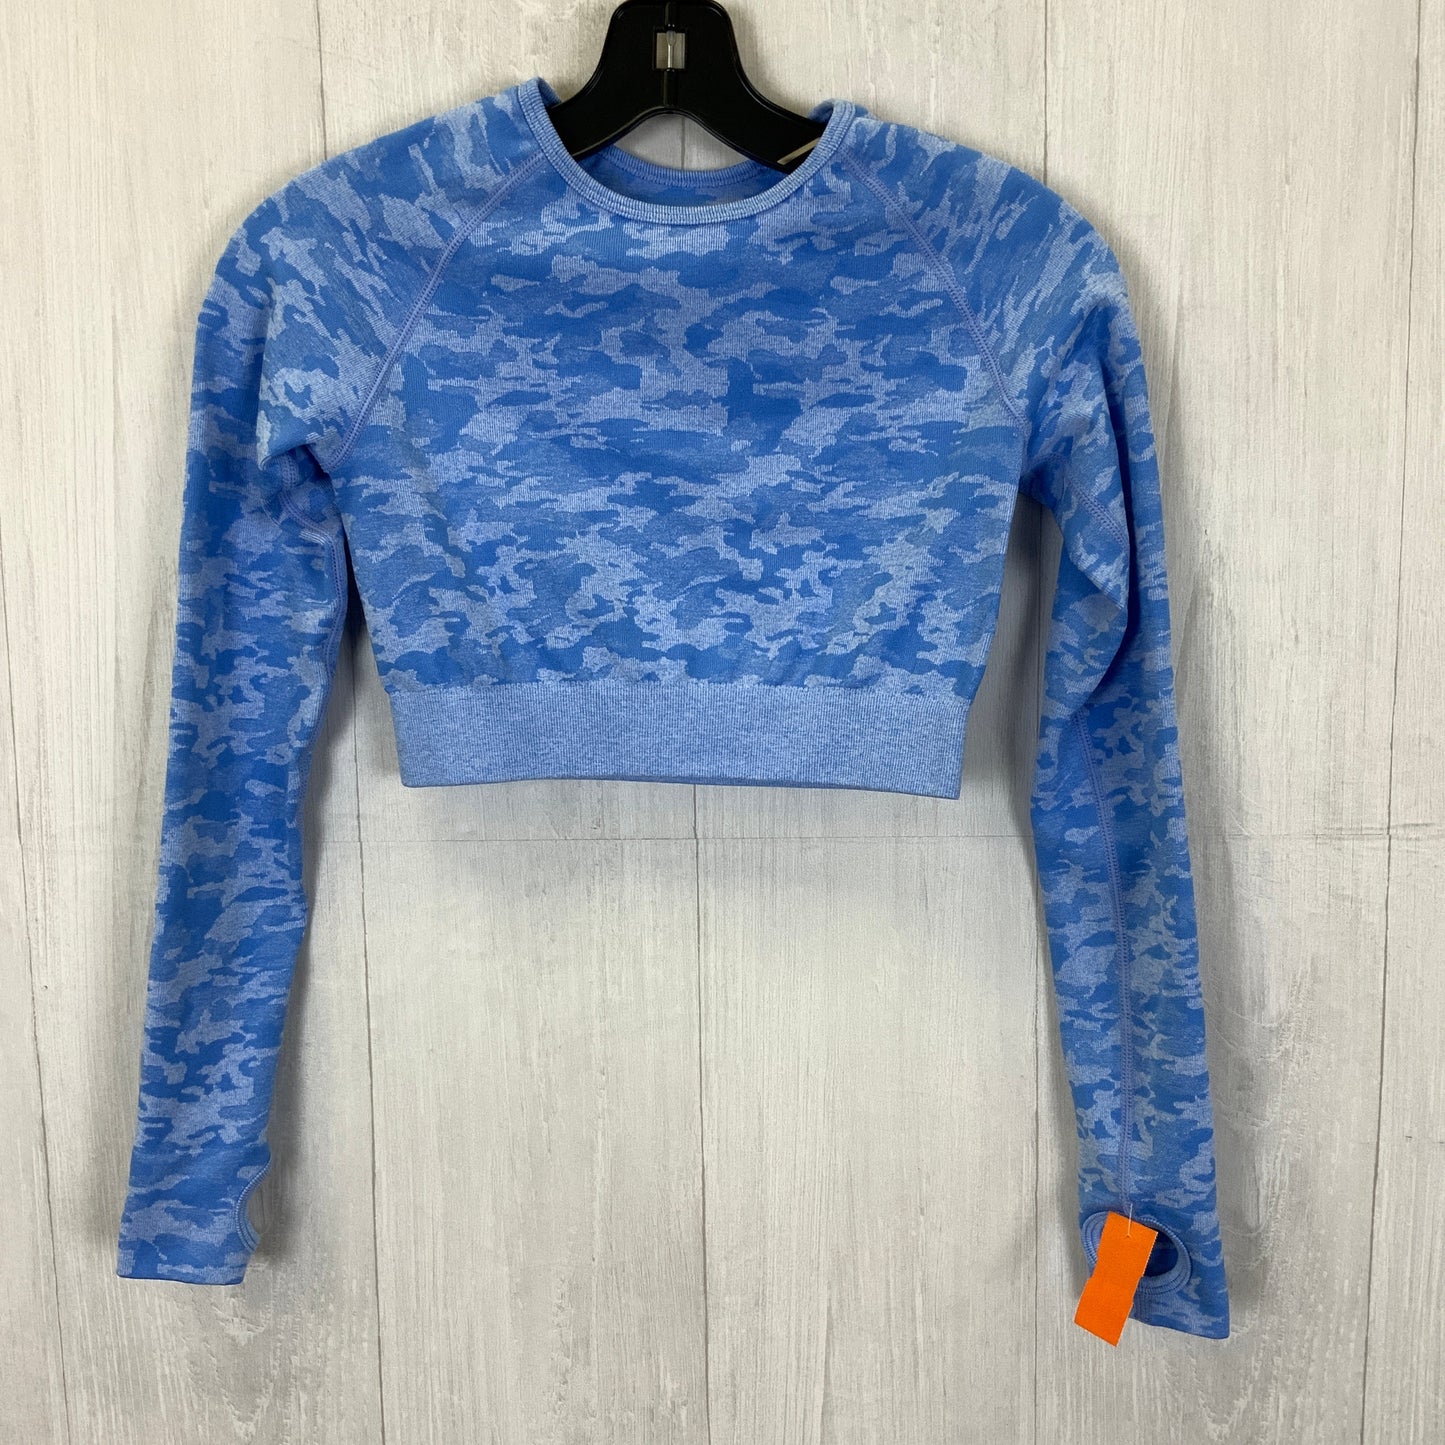 Blue Athletic Top Long Sleeve Crewneck Clothes Mentor, Size S